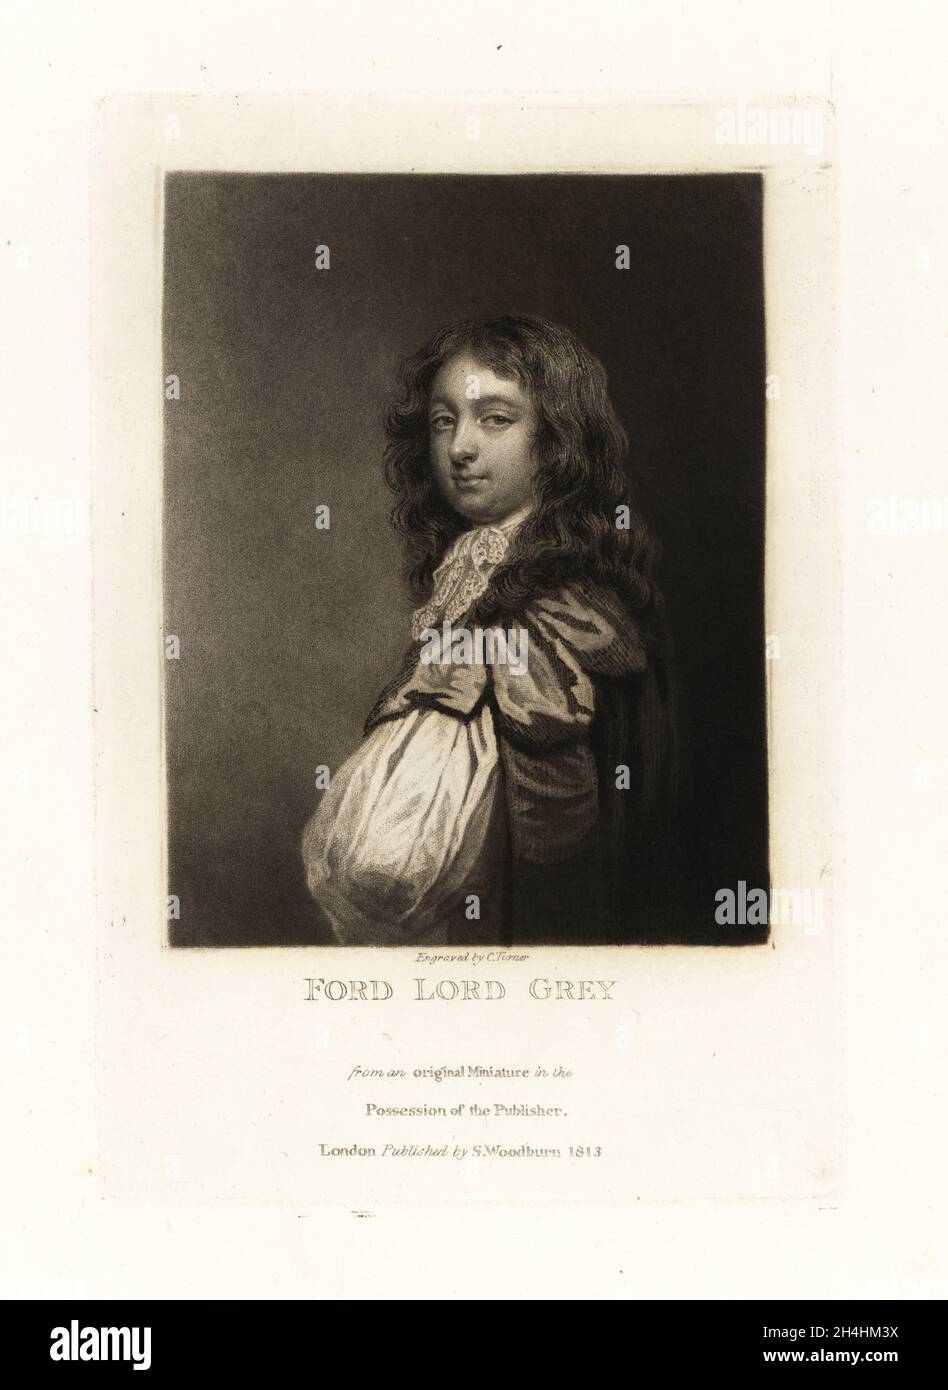 Ford Grey, 1st Earl of Tankerville, 1655- 170, 1st Viscount Glendale, 3rd Baron Grey of Werke, English nobleman, Whig politician and statesman, involved in the Rye House Plot. Ford, Lord Grey. Mezzotint engraving by Charles Turner after an original miniature portrait from Richard Earlom and Charles Turner's Portraits of Characters Illustrious in British History Engraved in Mezzotinto, published by S. Woodburn, London, 1813. Stock Photo